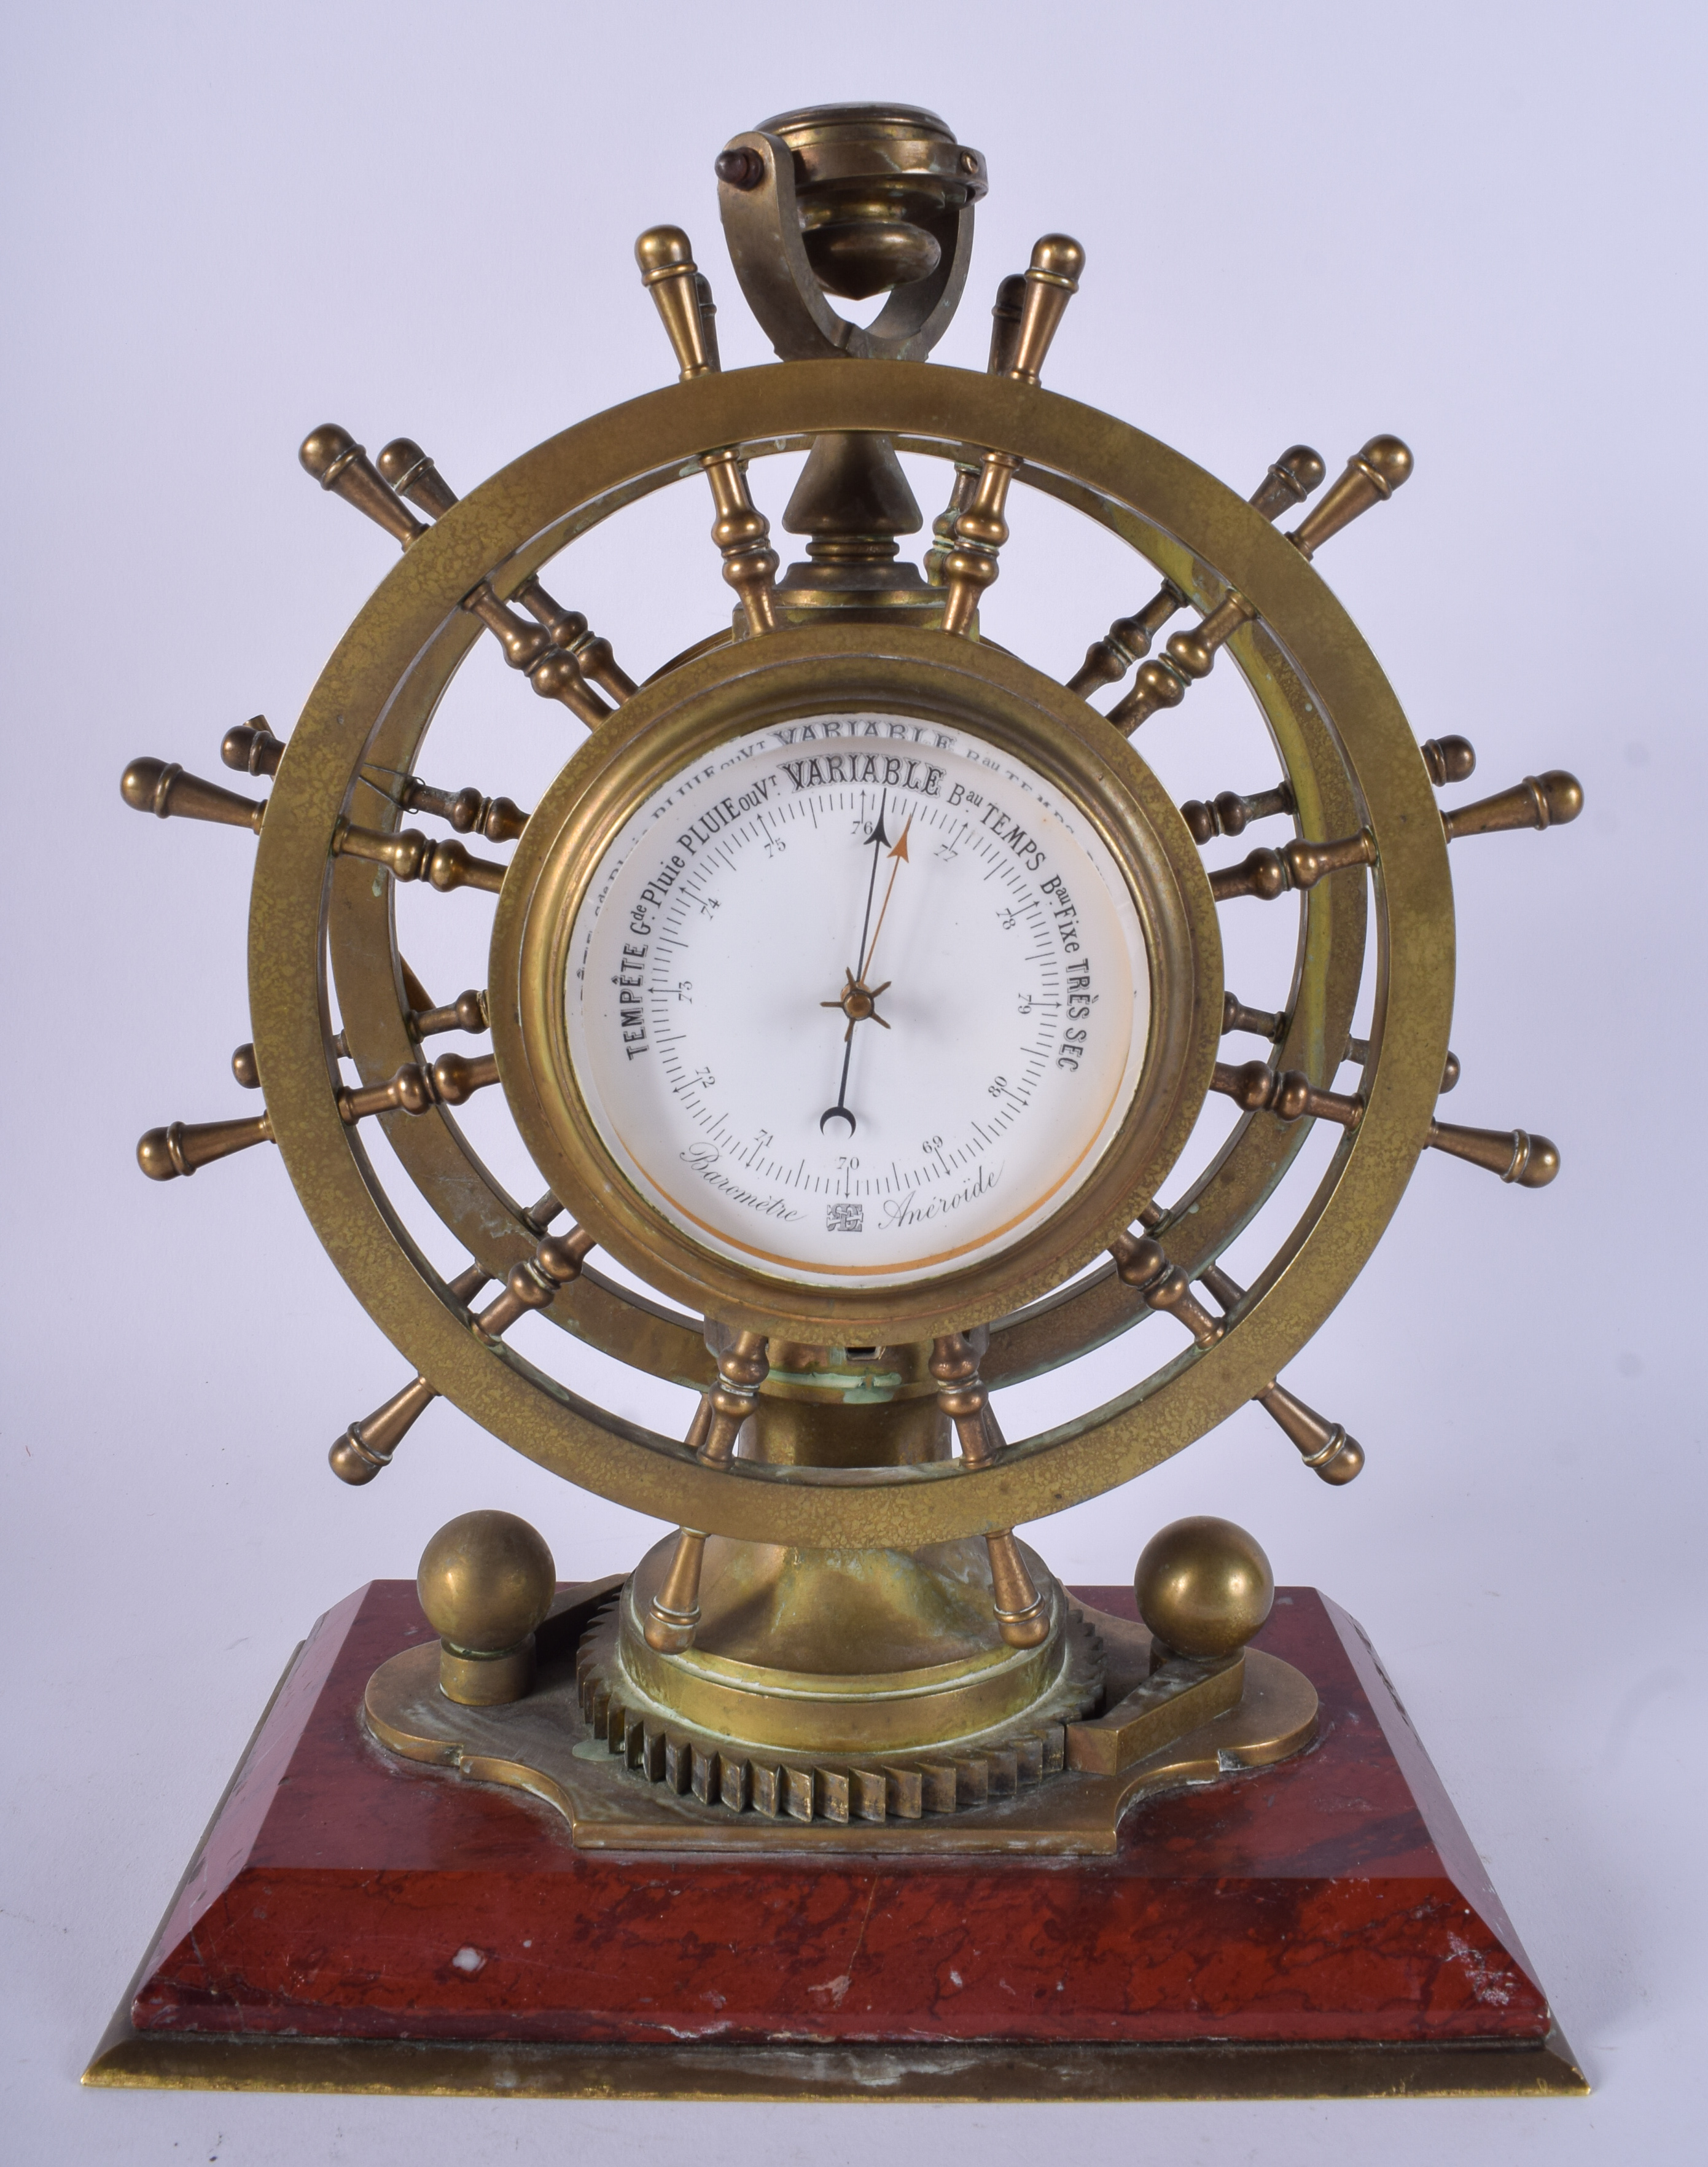 A RARE 19TH CENTURY FRENCH INDUSTRIAL SHIPS WHEEL BRONZE CLOCK with twin dials, silvered compass an - Image 2 of 3